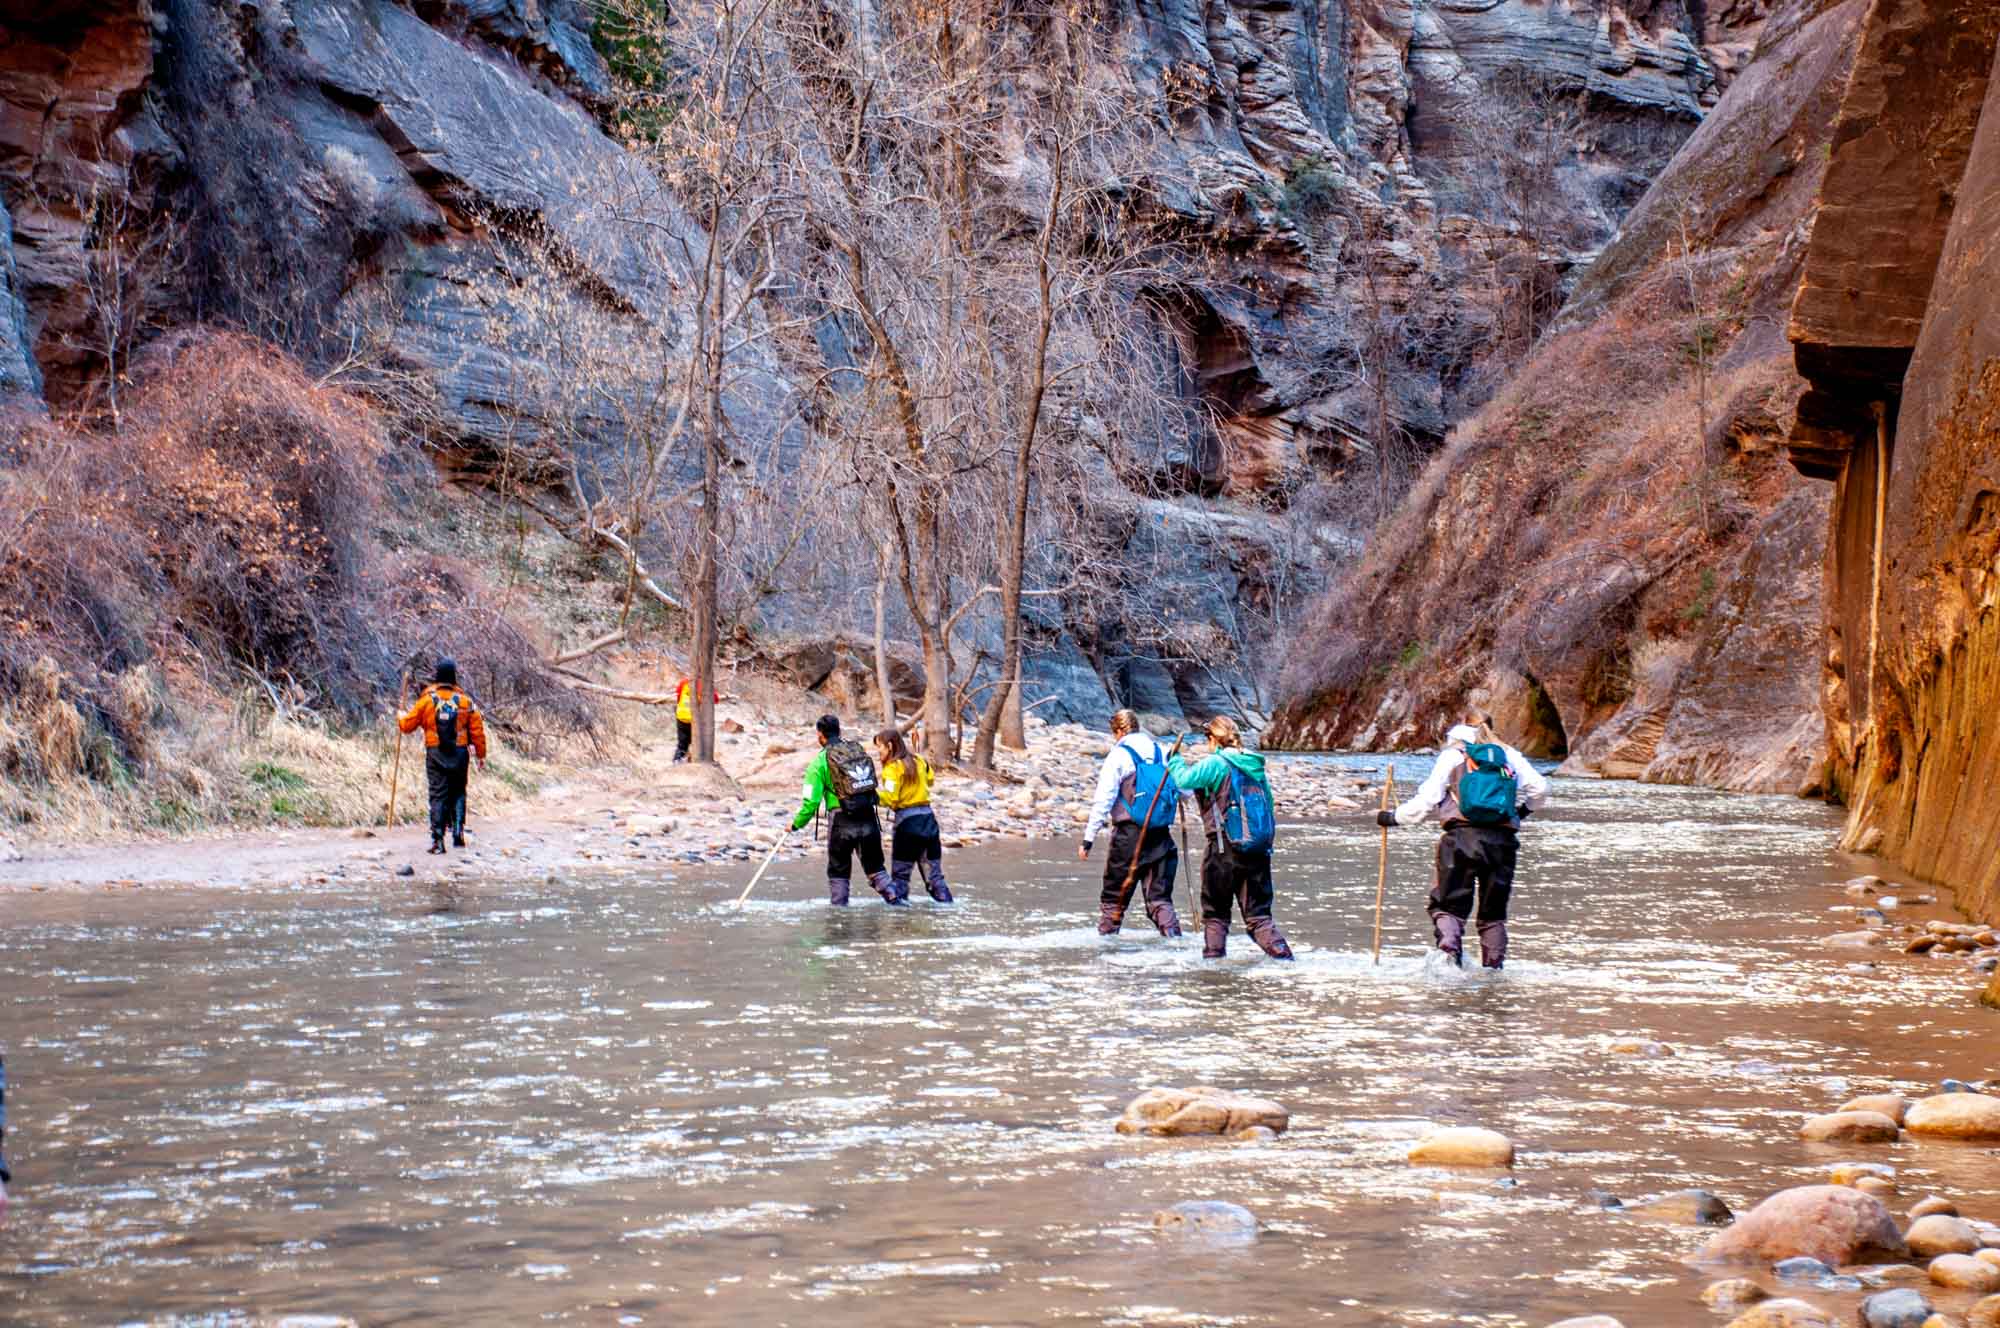 Hikers walking up a river in The Narrows at Zion